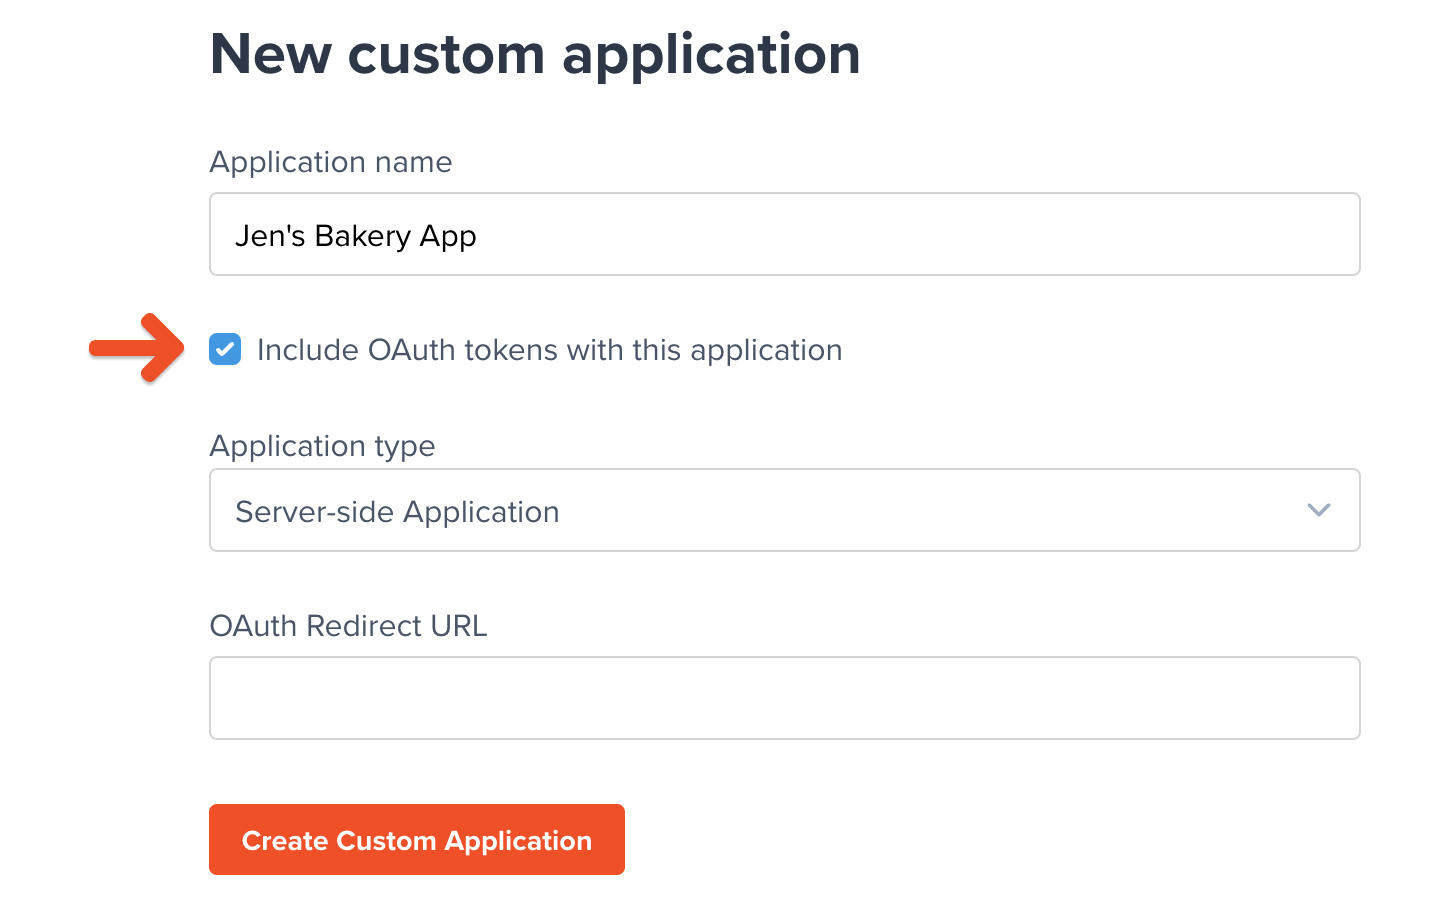 Include OAuth tokens with this application